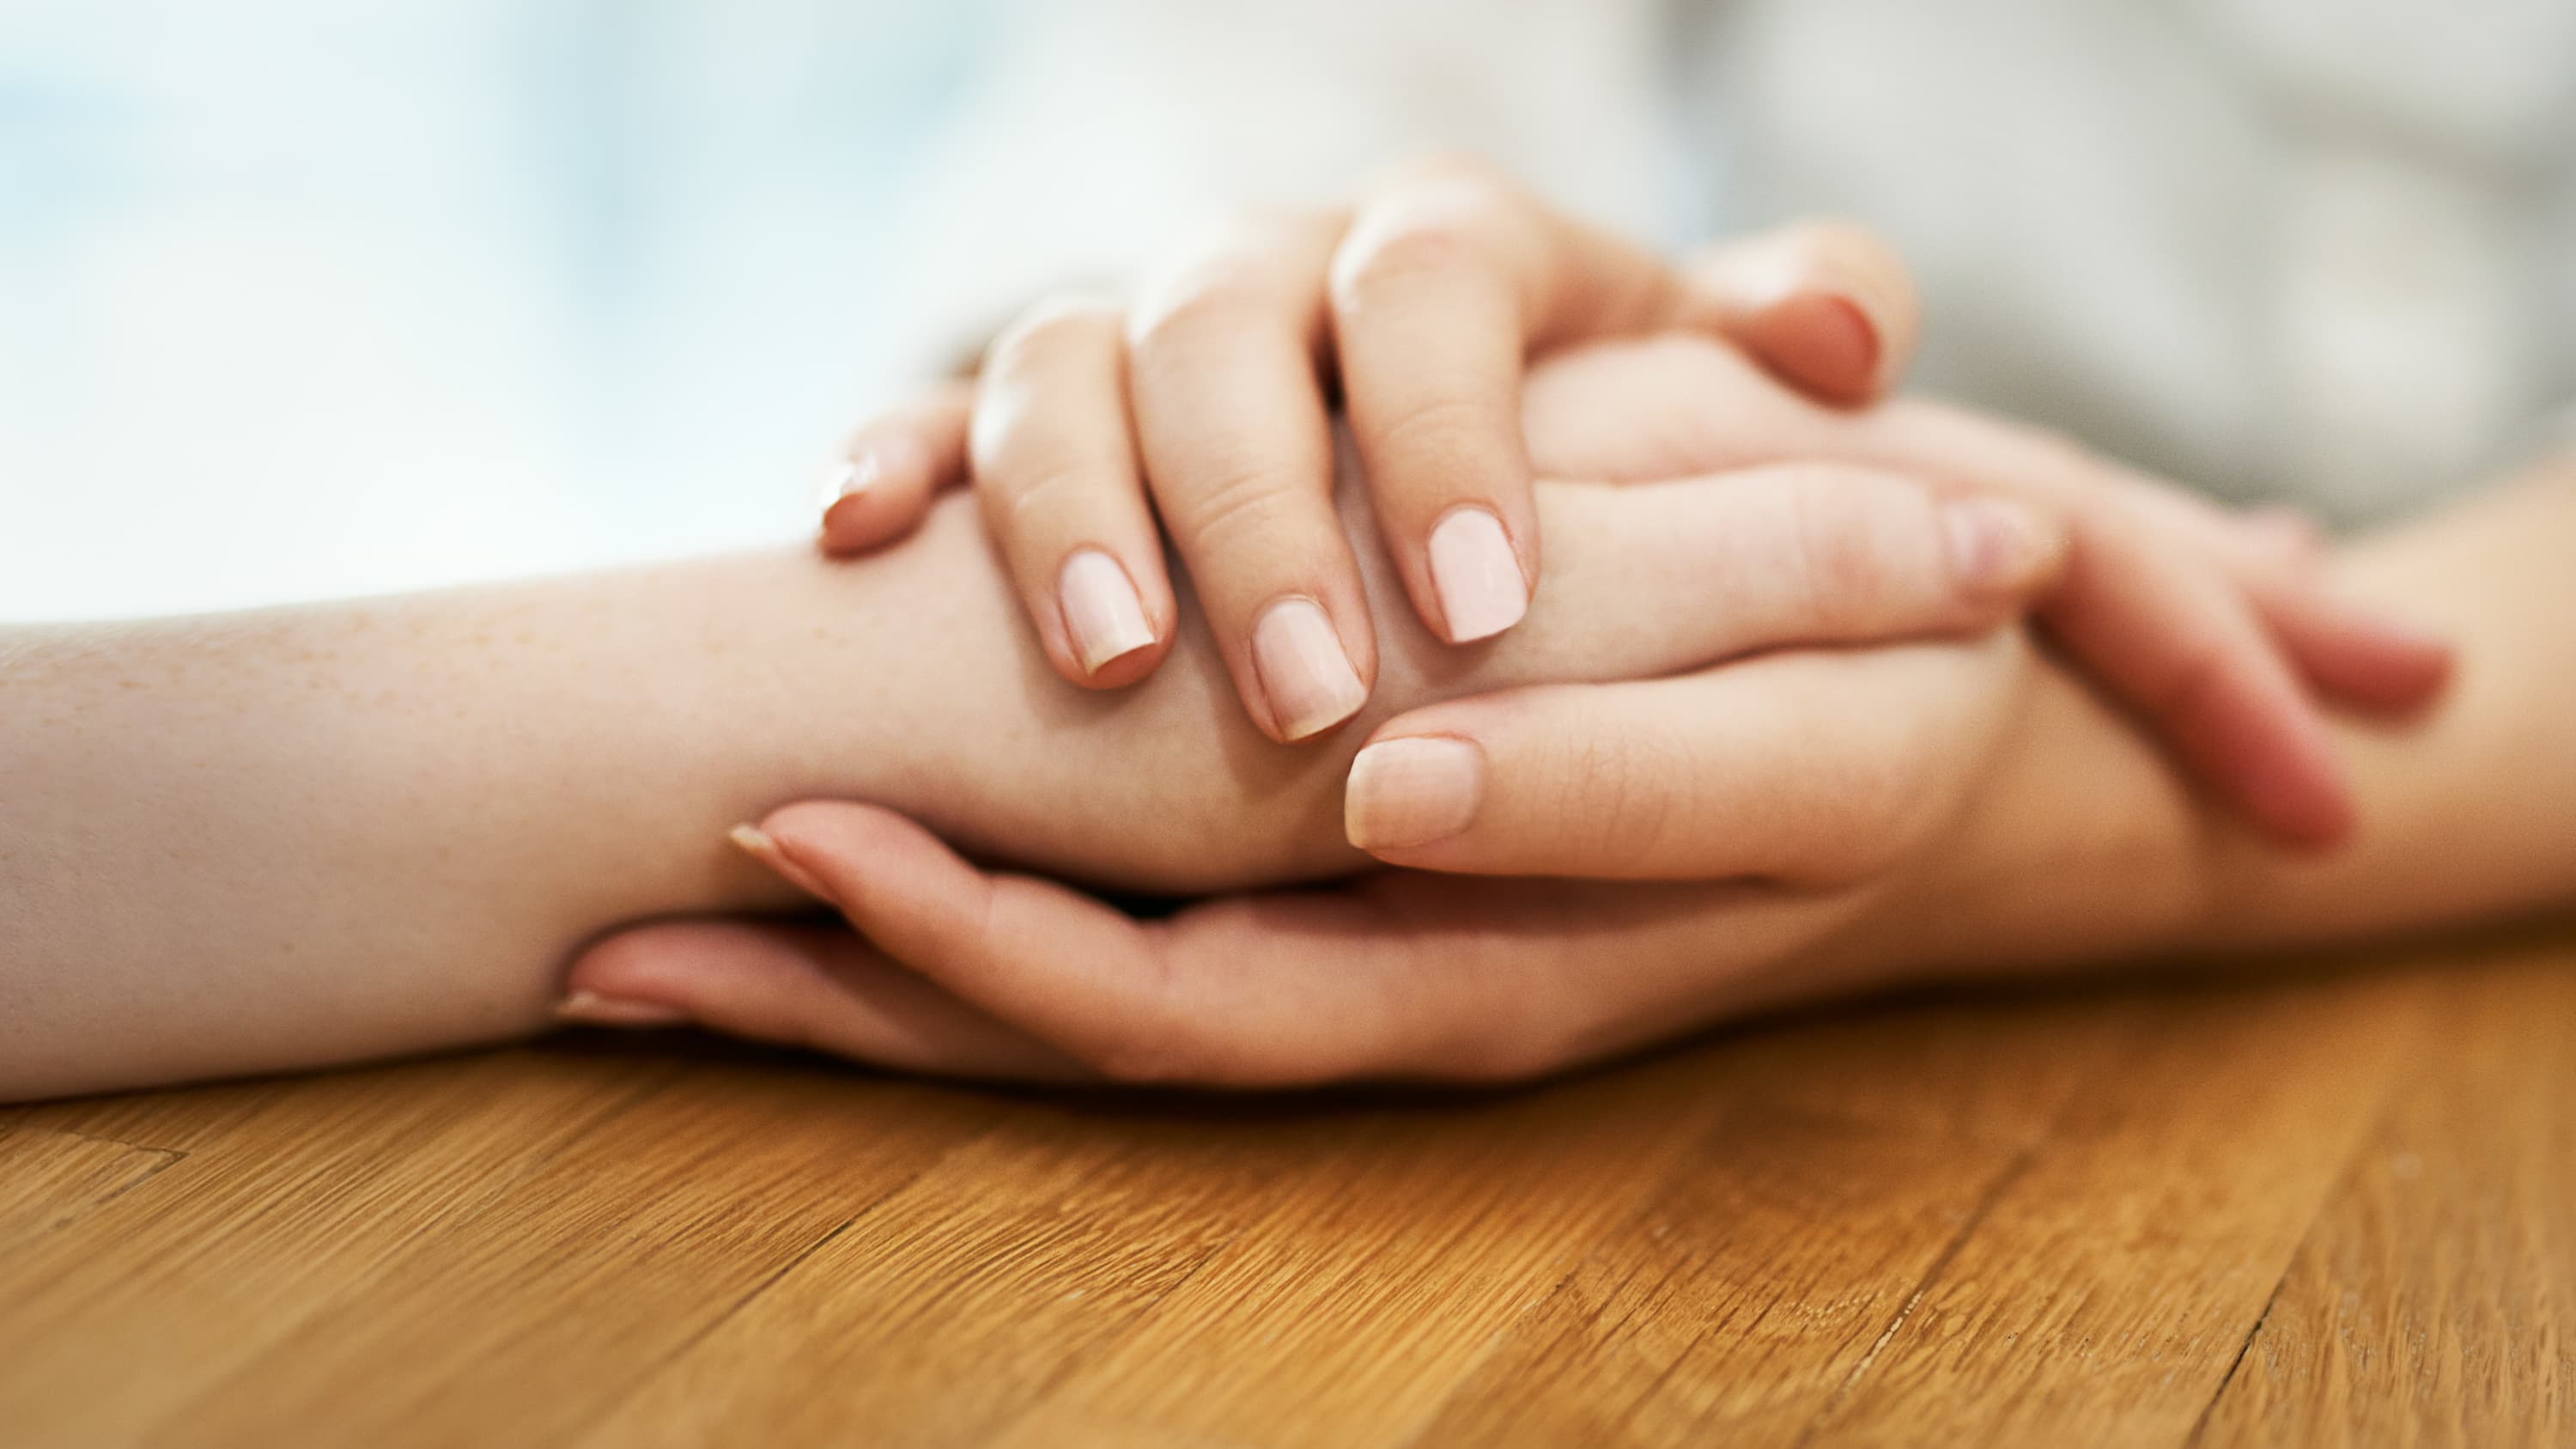 A patient is comforted by a family member holding her hand possibly following a skin lymphoma diagnosis.